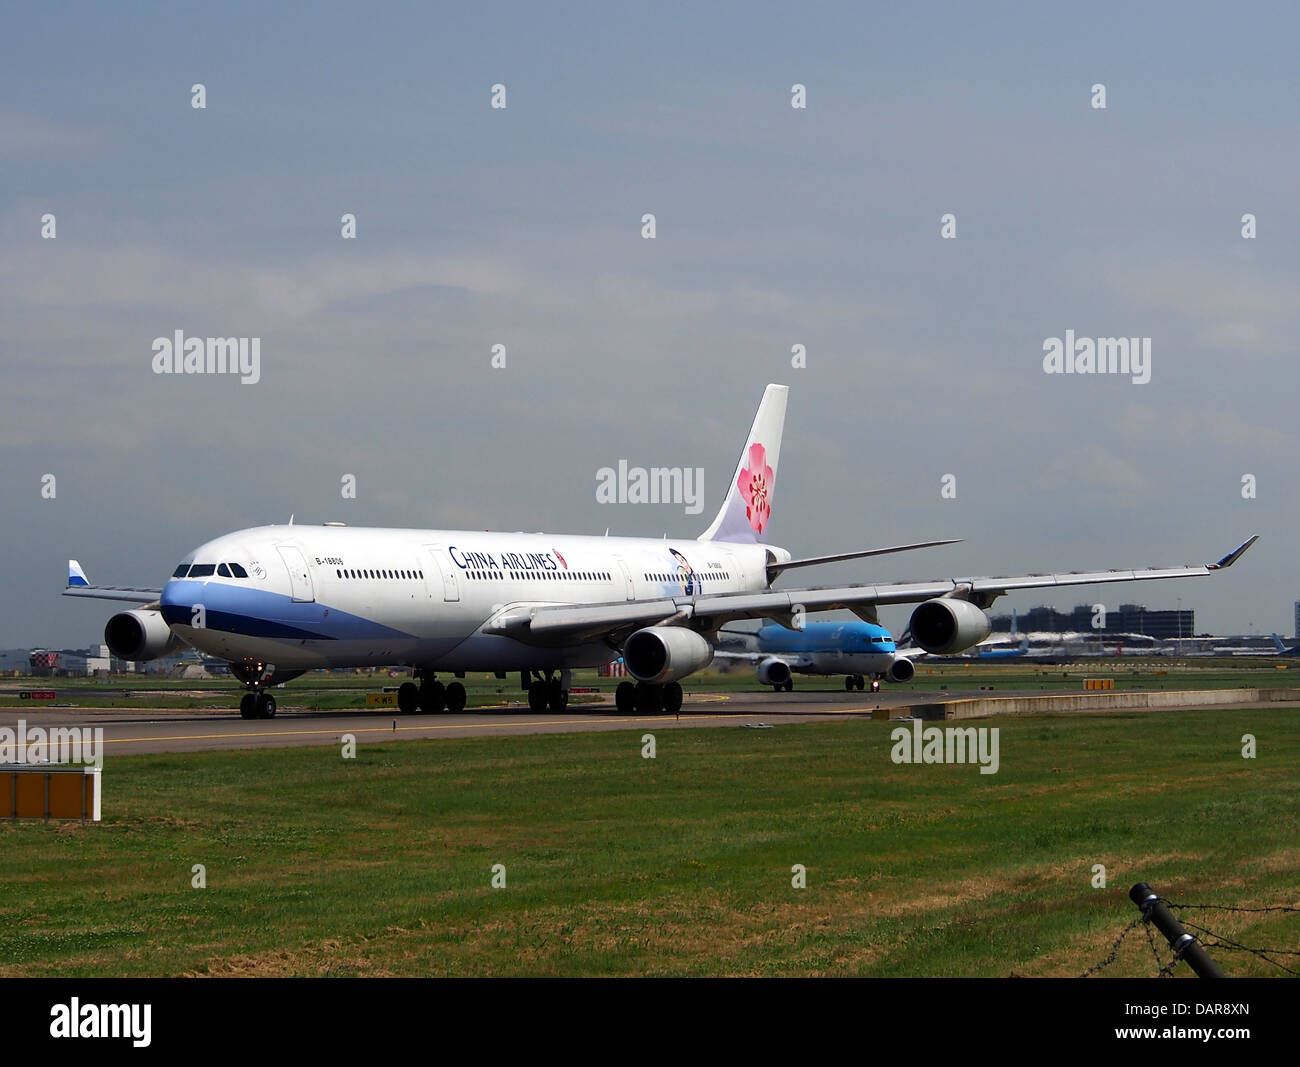 B-18806 China Airlines Airbus A340-313 X - Cn 433 1 Stockfoto